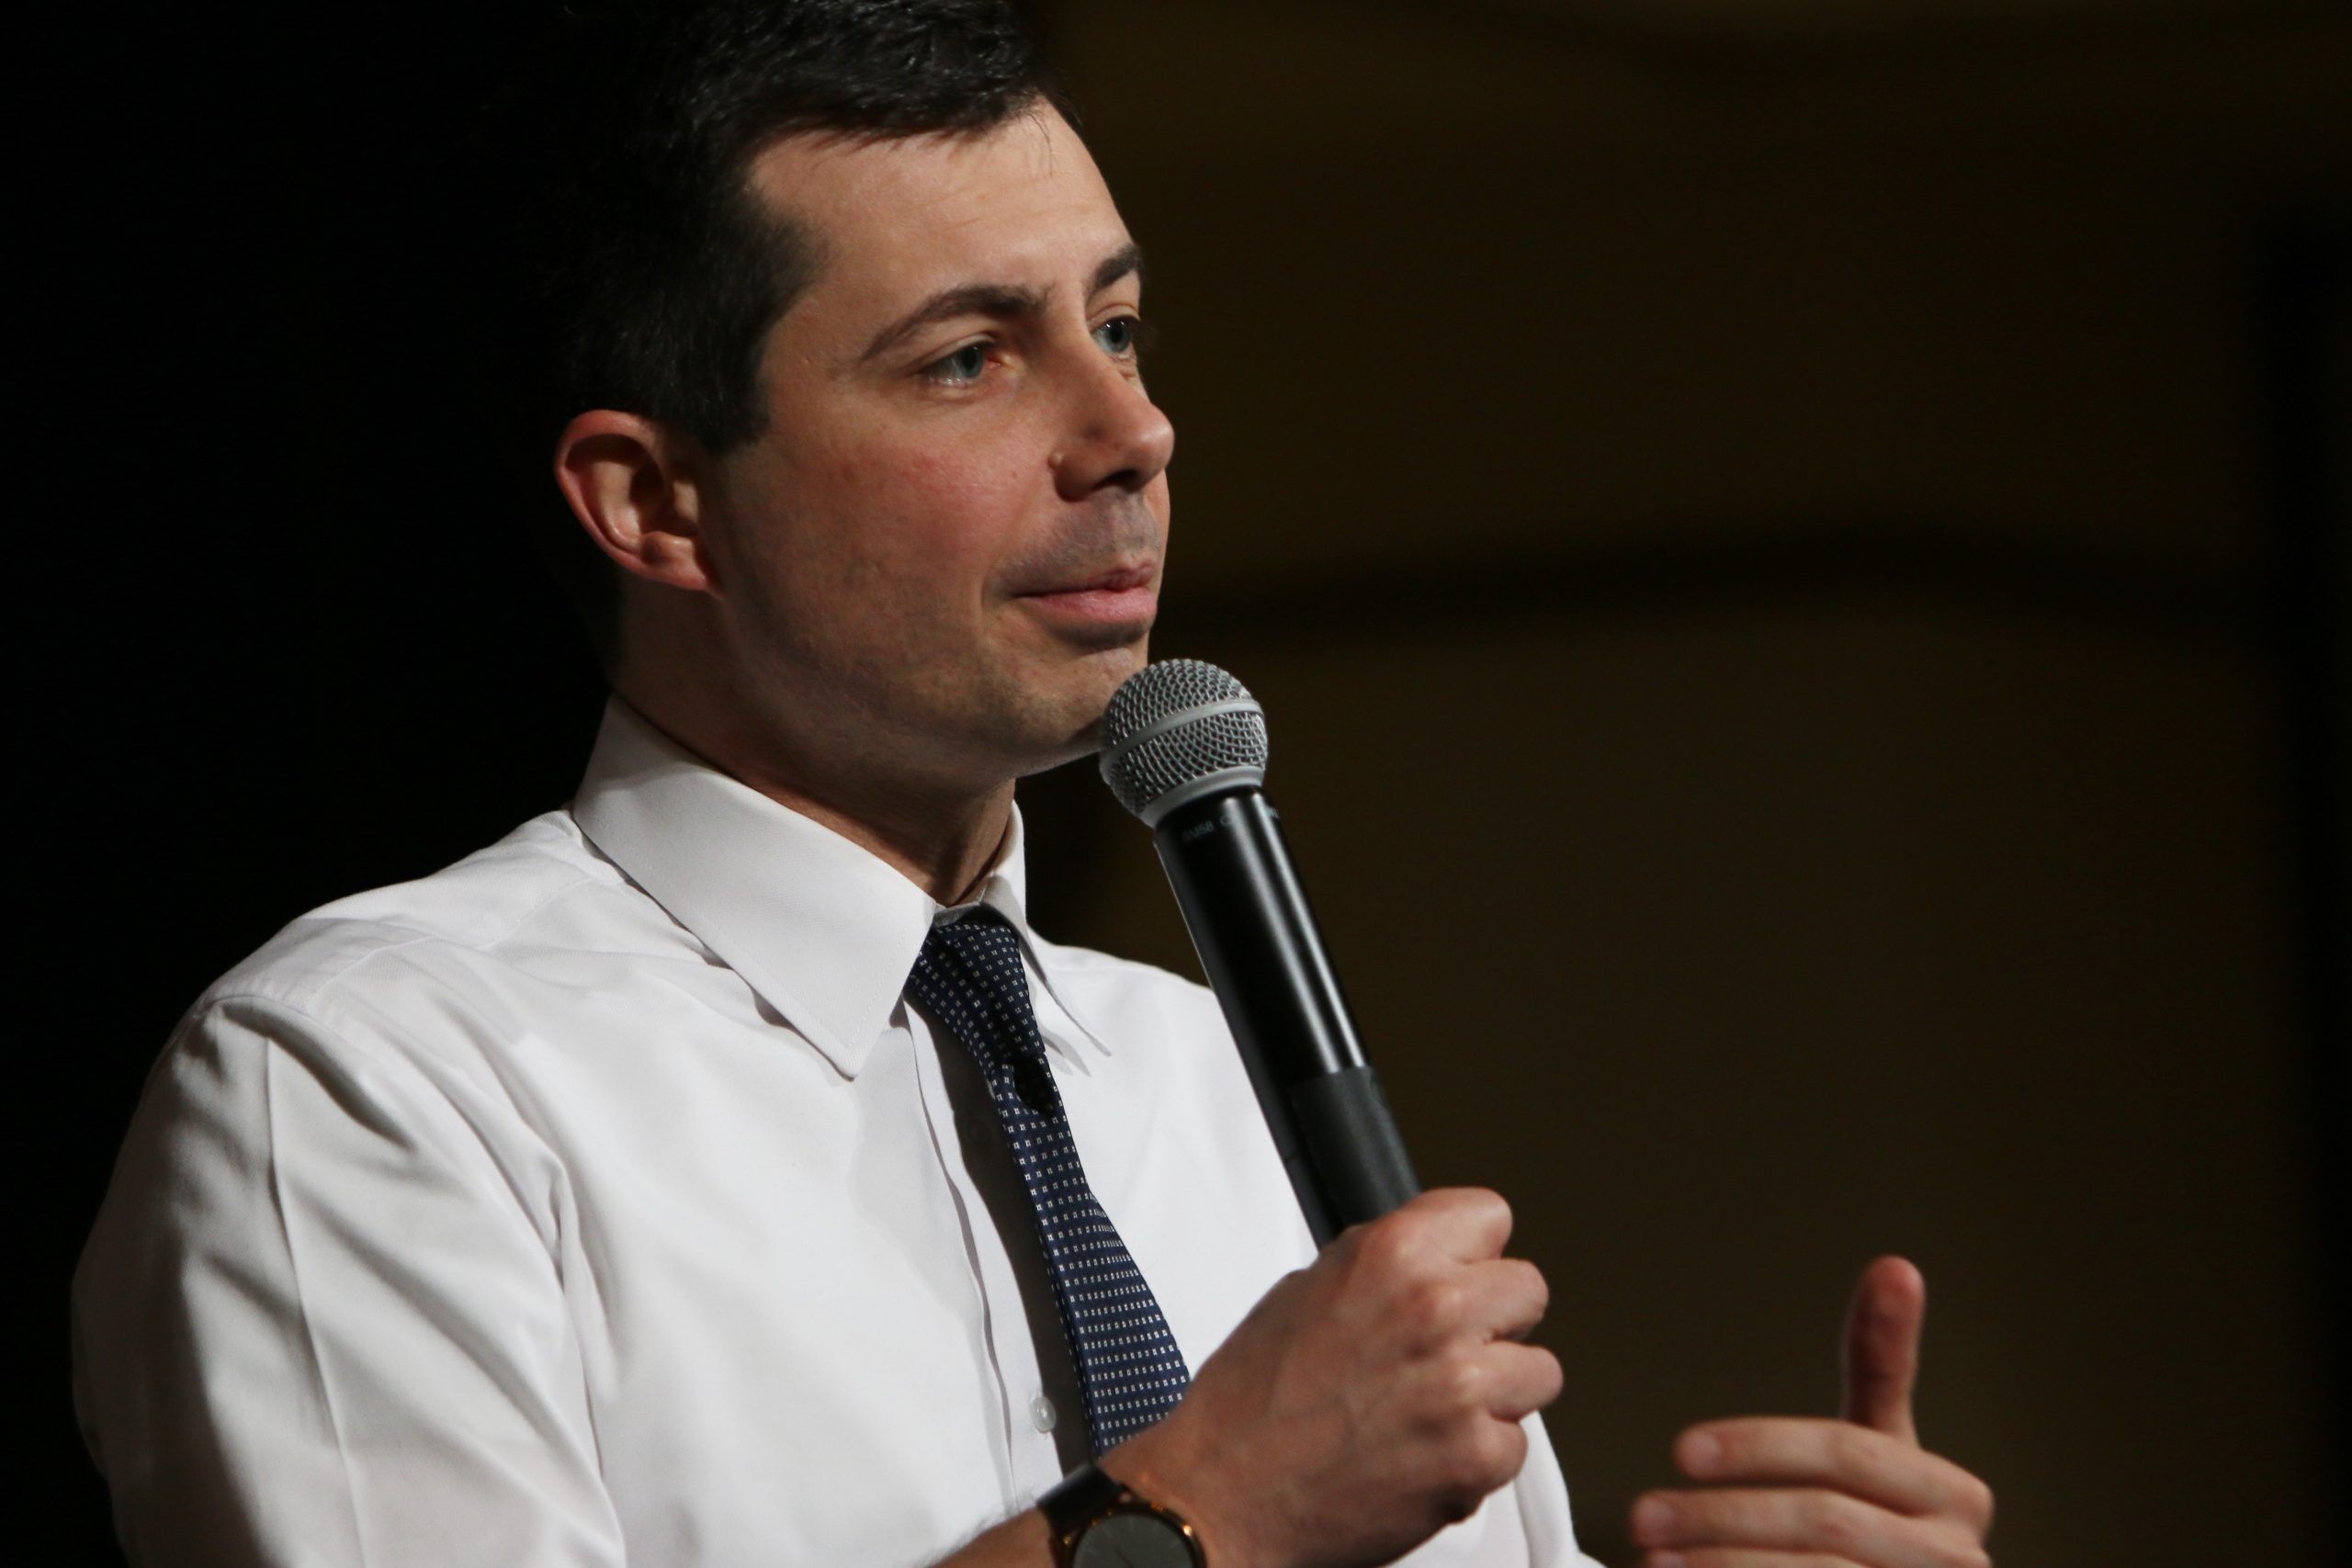 Orange City, Iowa - January 16, 2020: Pete Buttigieg, Democratic presidential candidate, speaks to the crowd at a political rally.